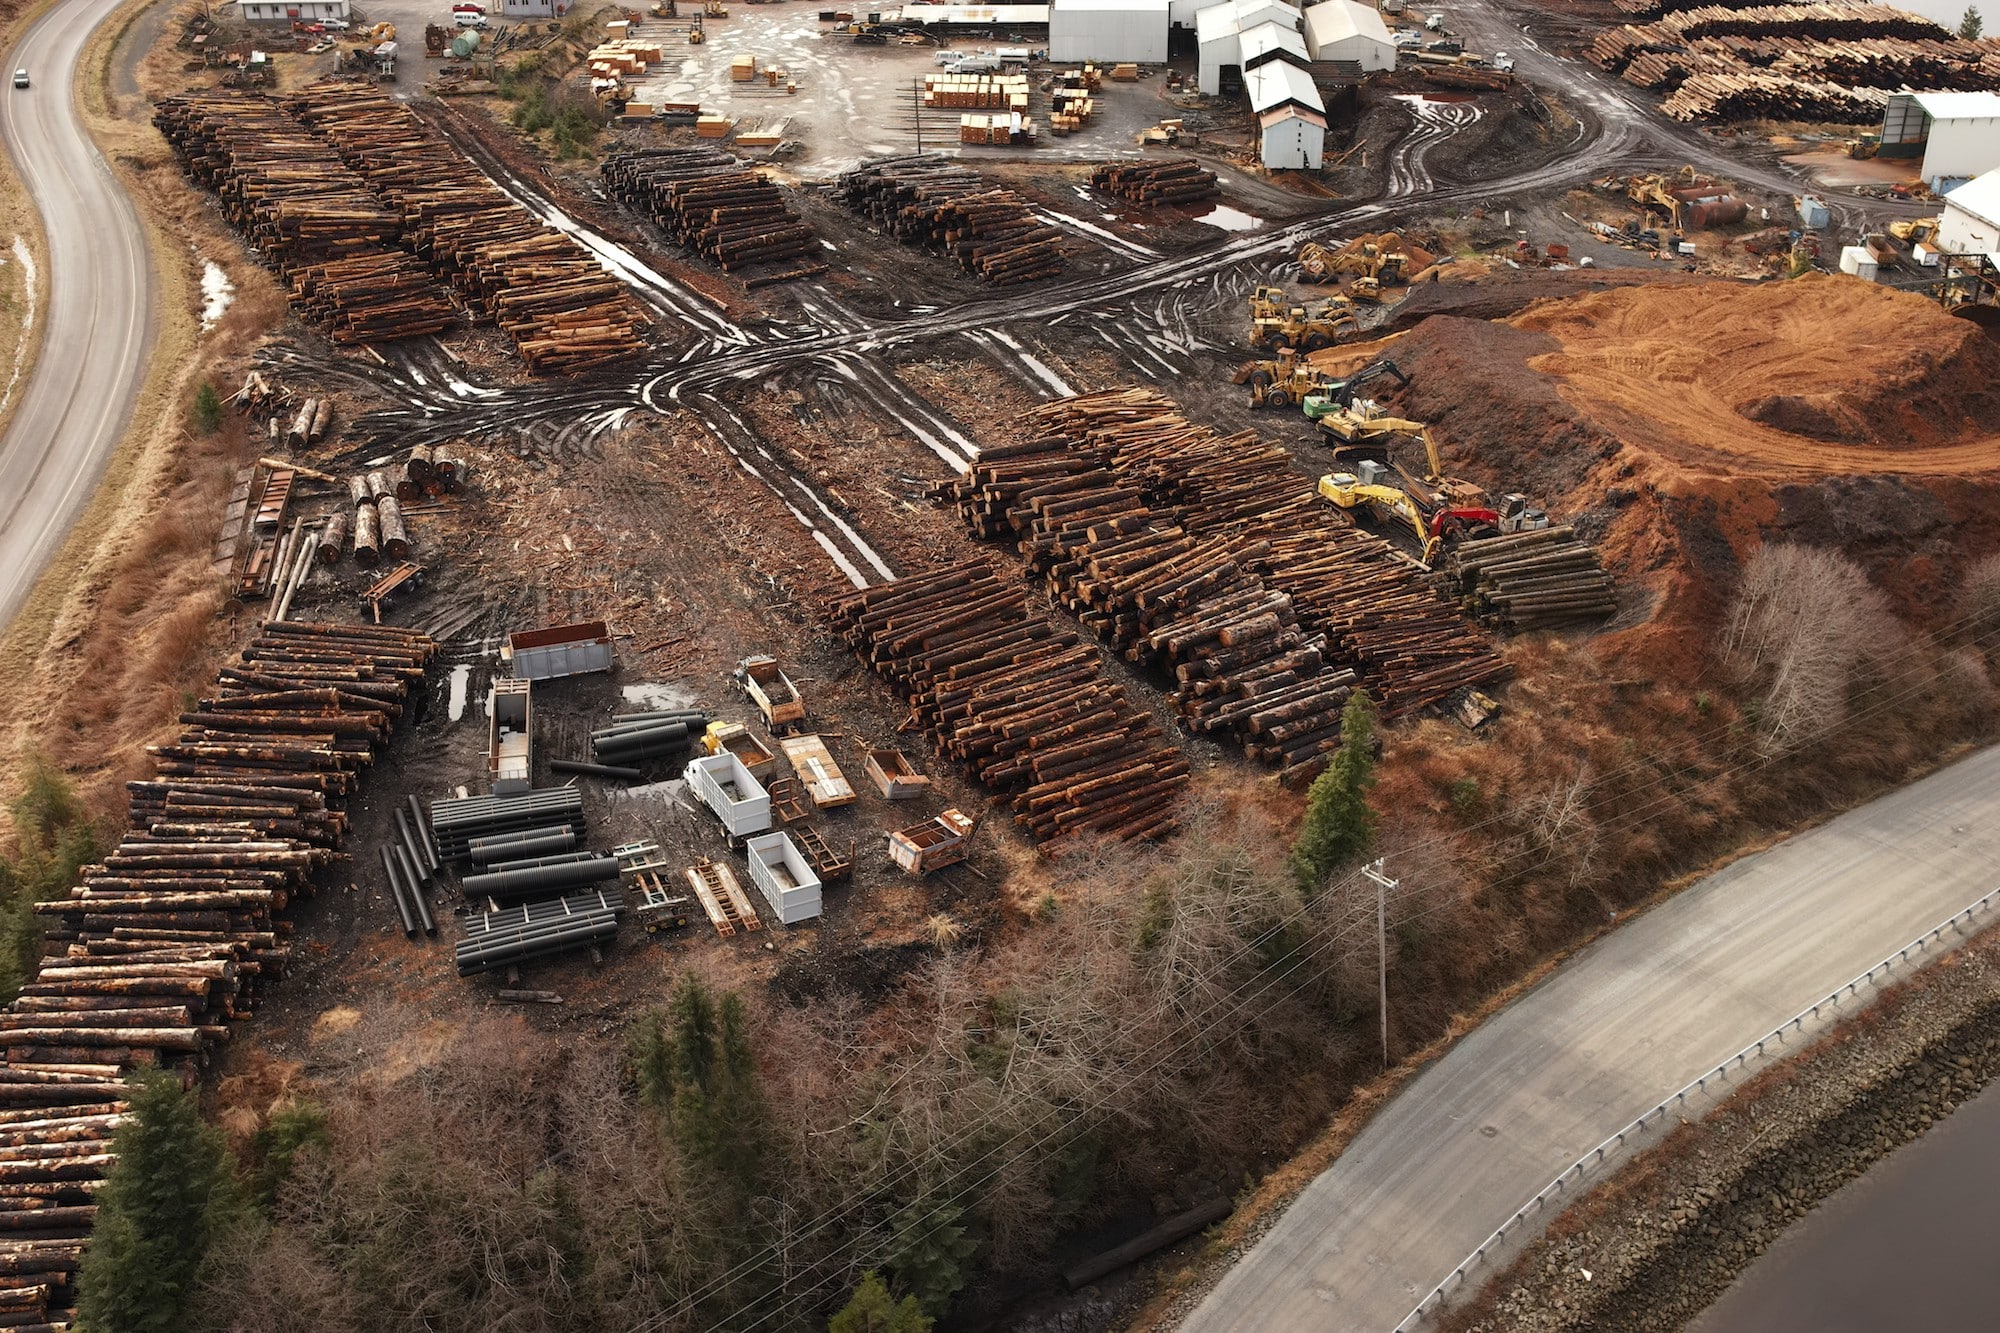 an aerial view of a lumberyard with many large piles of logs near a road